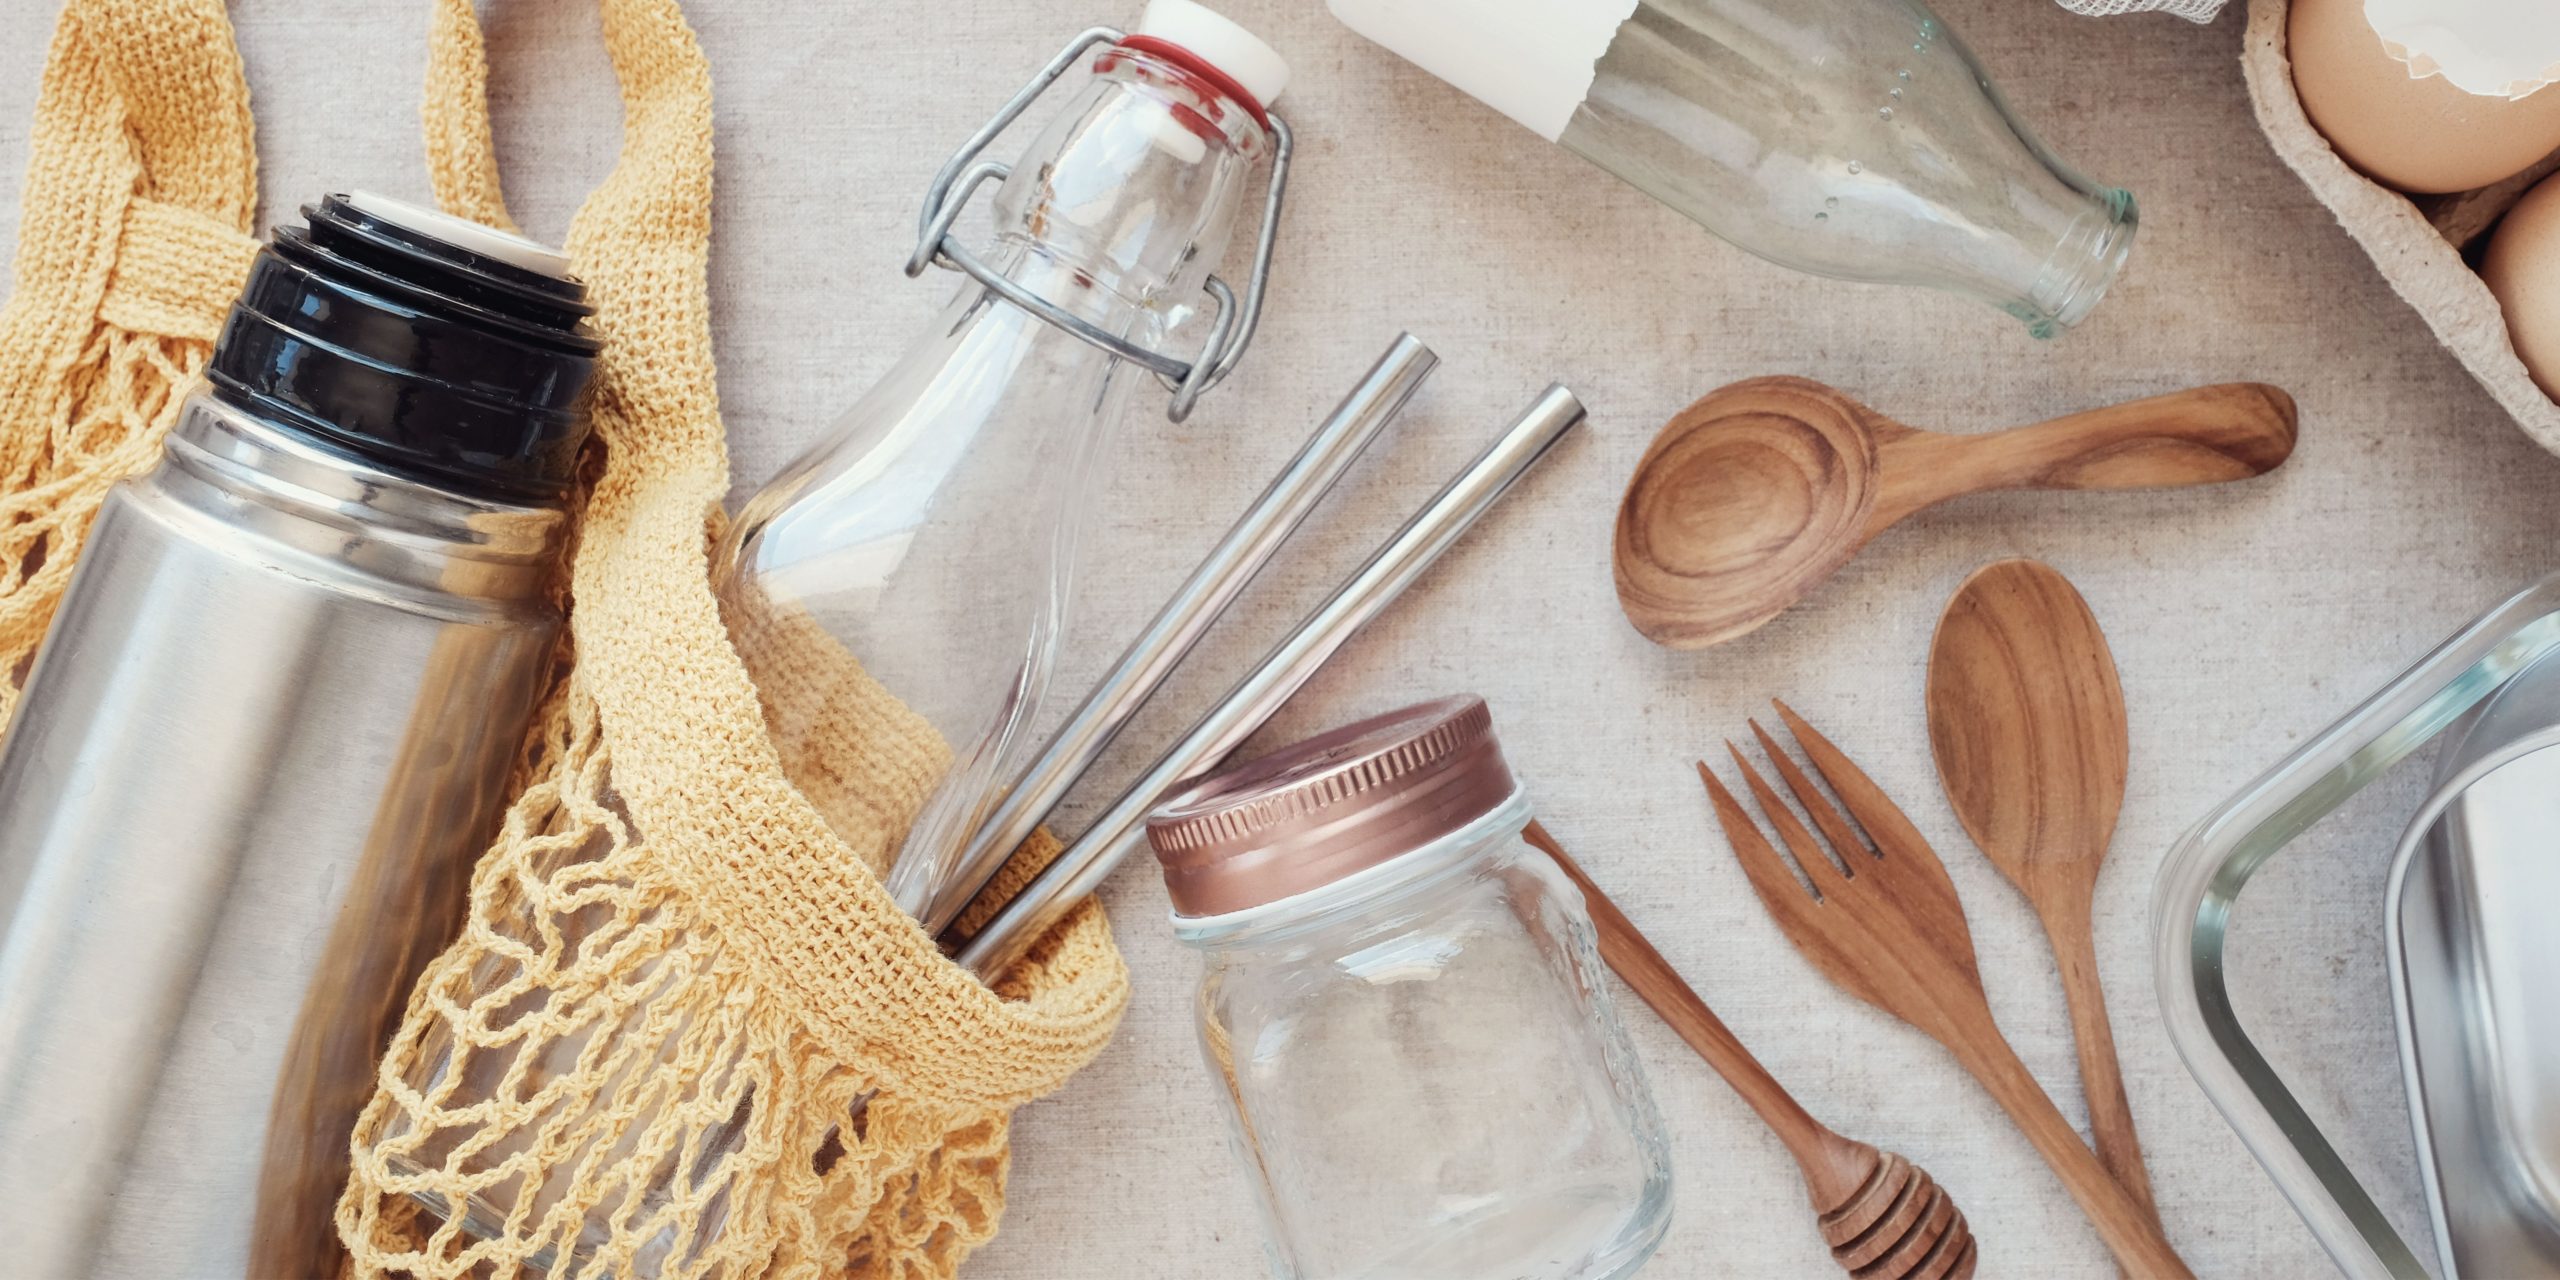 Photo shows reusable utensils, straws, a class jar, a metal thermos, and a glass bottle inside a woven bag.